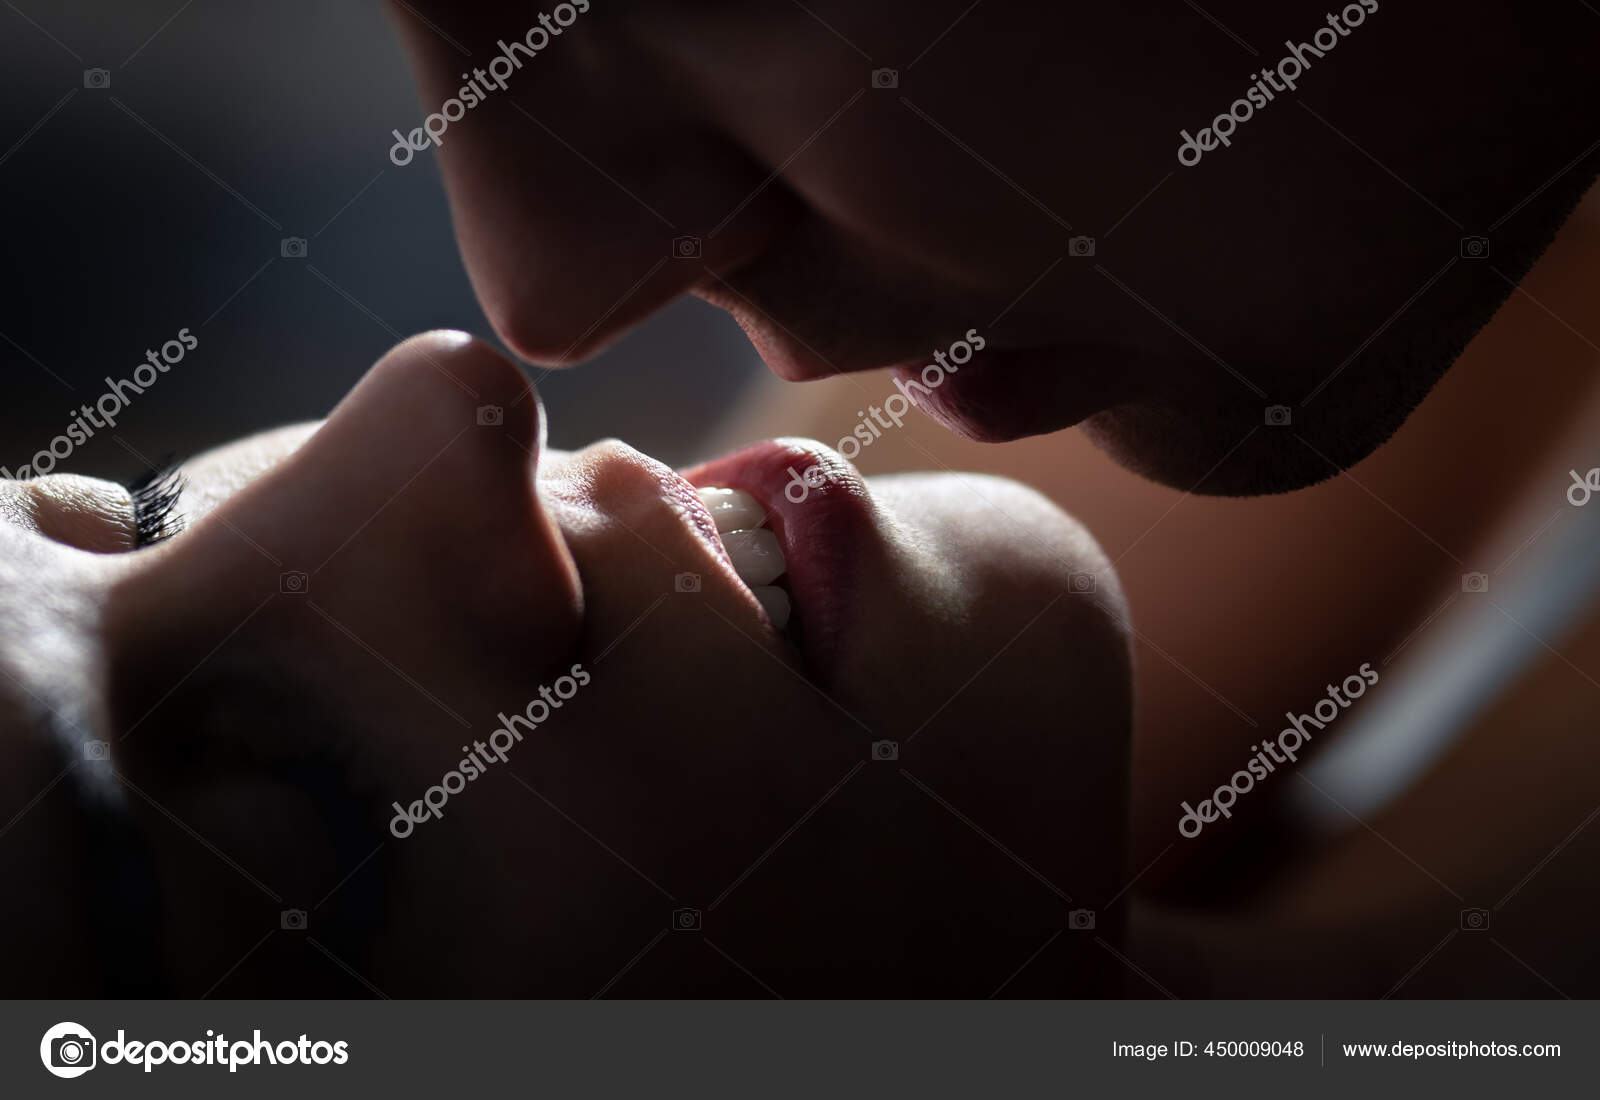 Kissing Couple Night Sex Dark Hotel Room Lips Woman Man Stock Photo by ©terovesalainen 450009048 picture